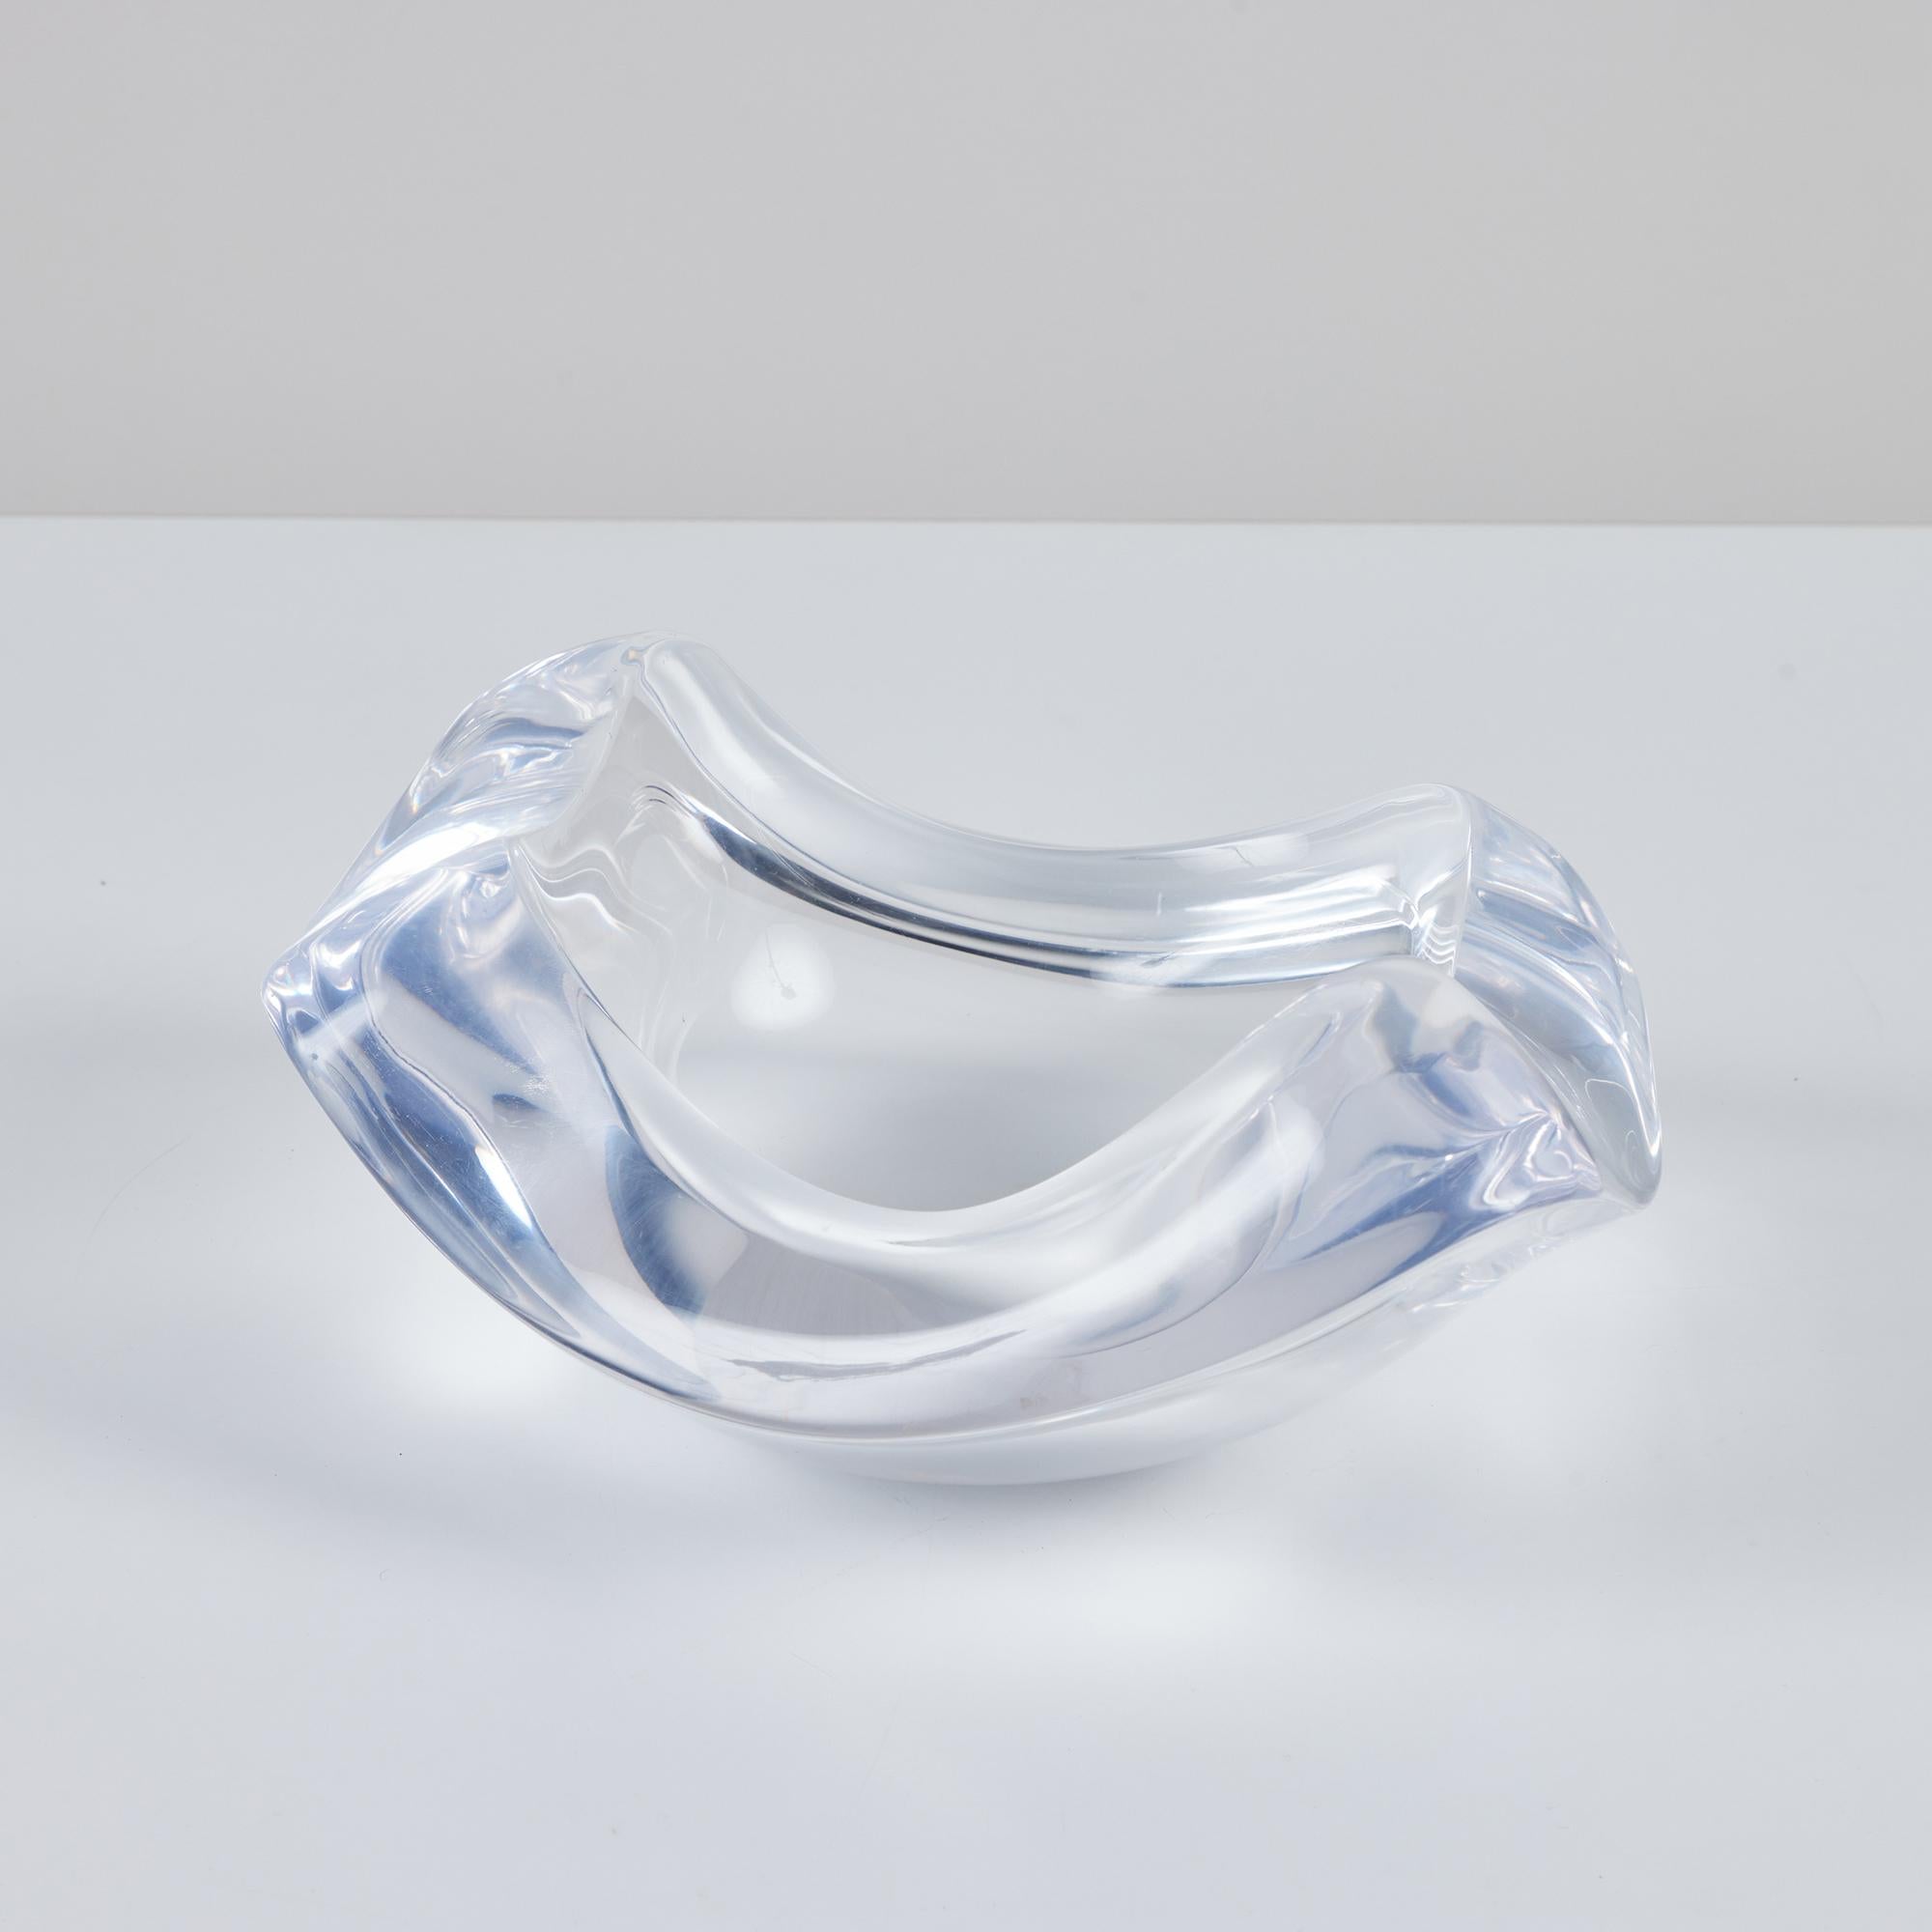 Rectangular molded Lucite bowl by Ritts Co., c.1970s, USA. Bowl features a square shape with thick sides that curl upwards.

Dimensions
12